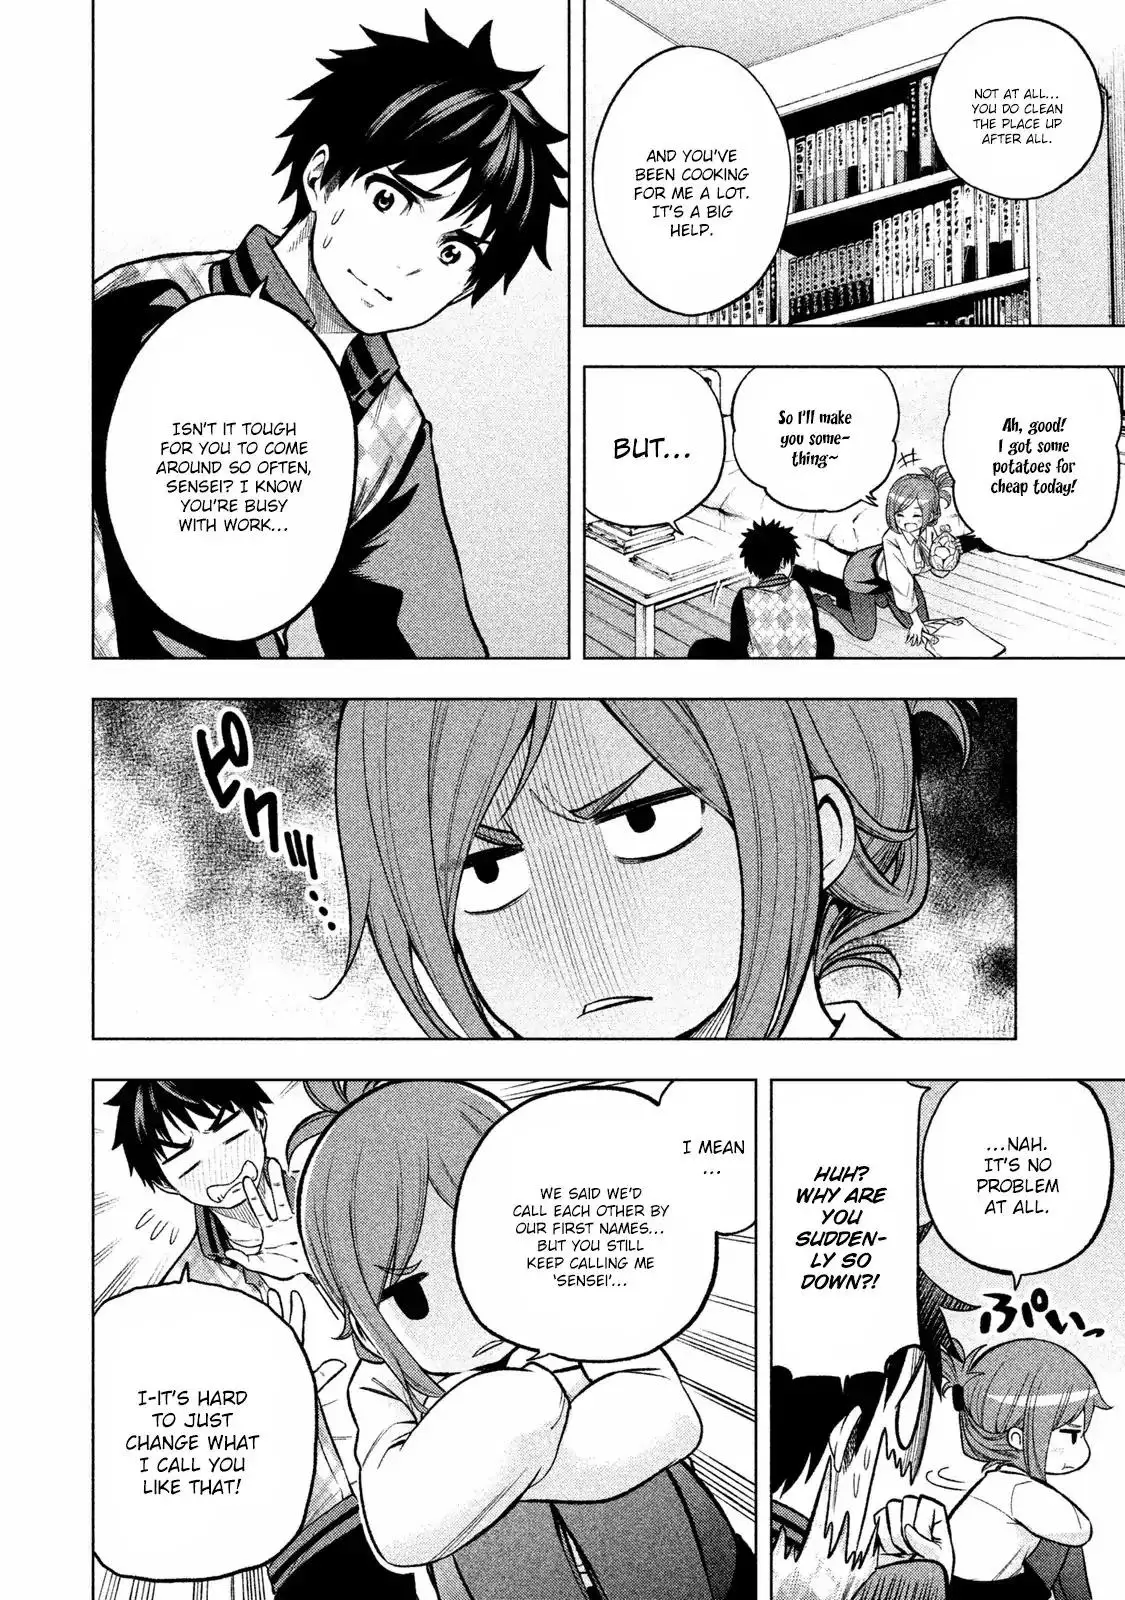 Why are you here Sensei!? - 10.5 page 2